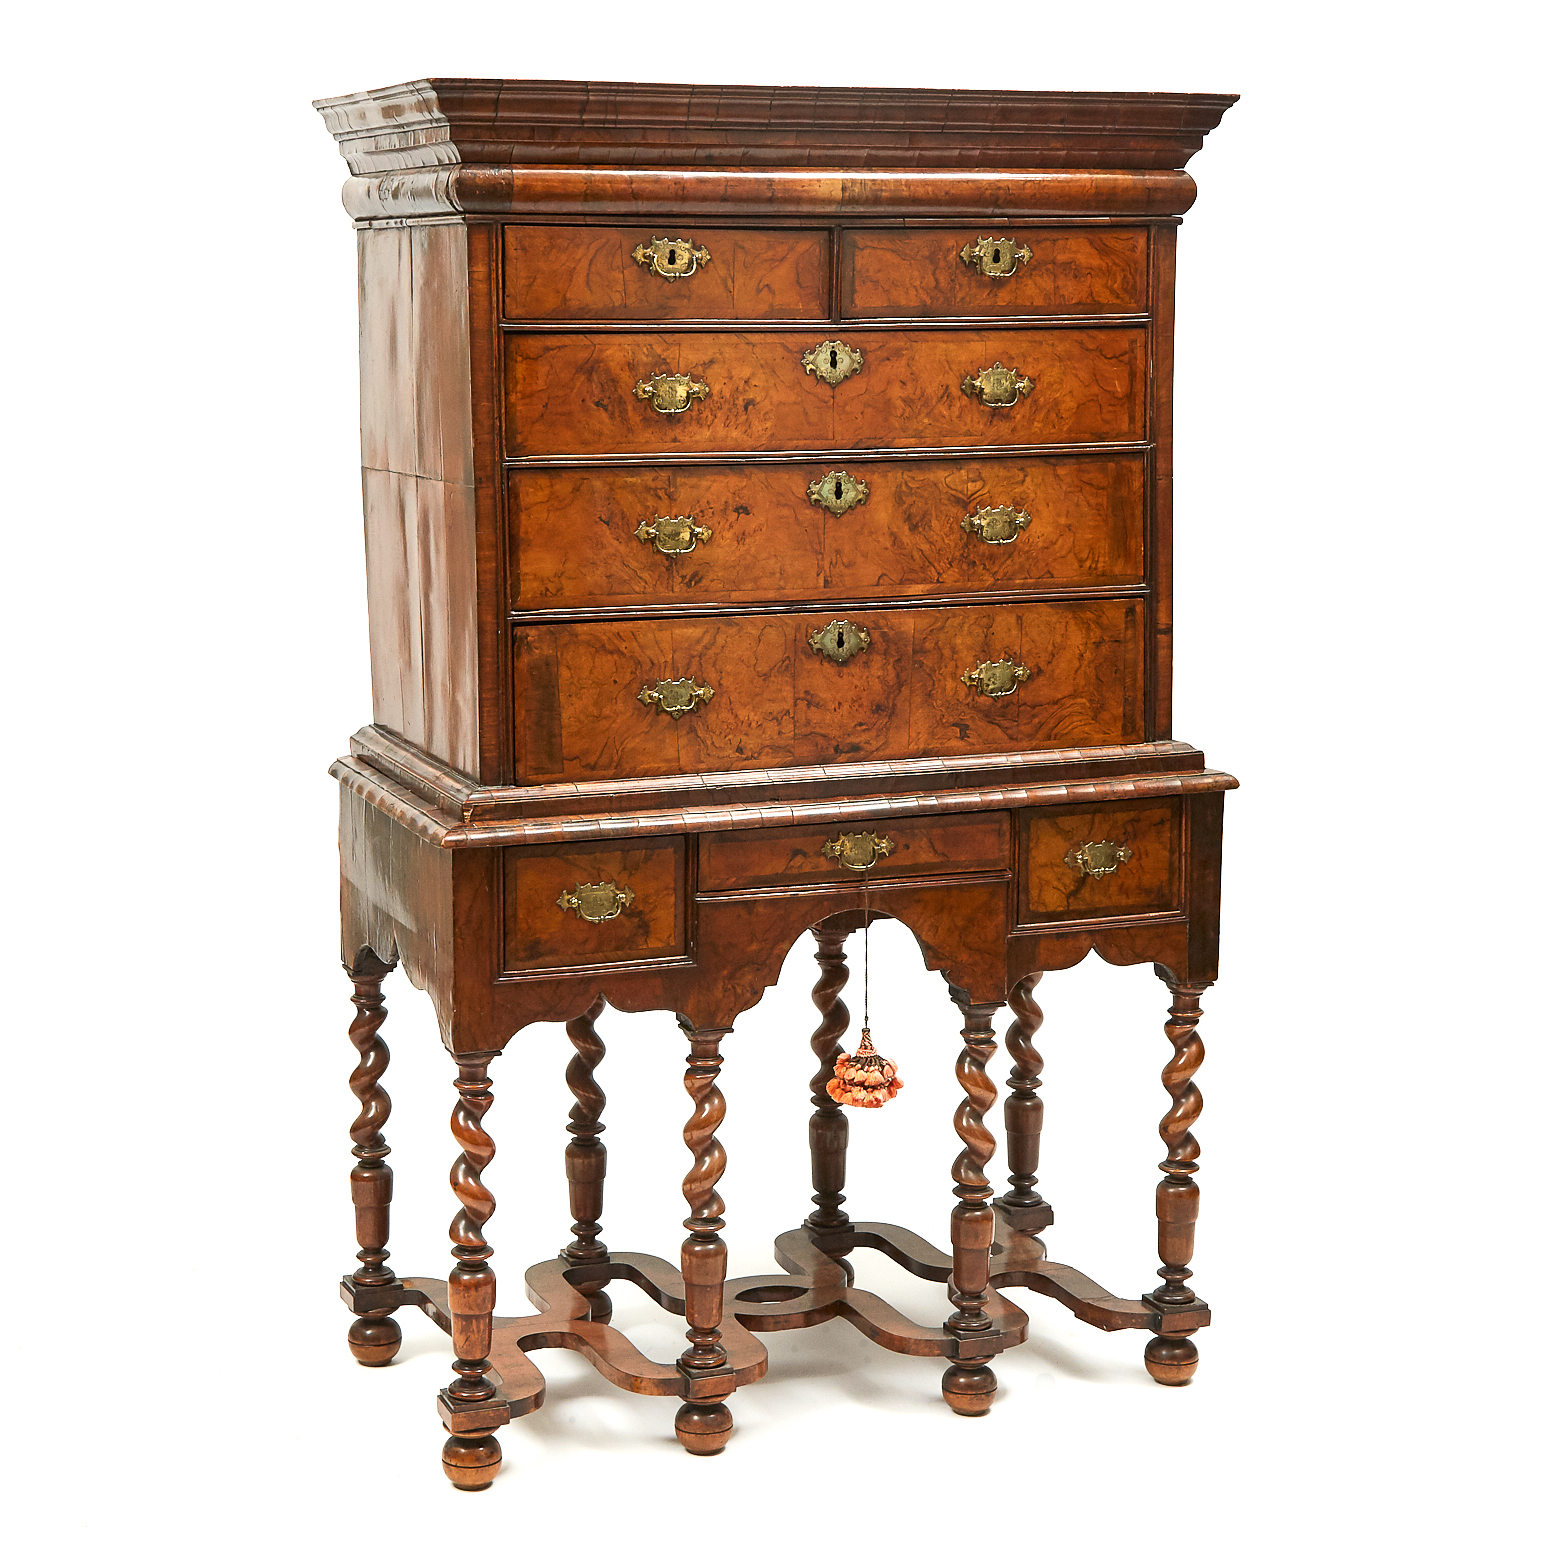 William and Mary Figured Walnut Highboy Chest on Stand, c.1700